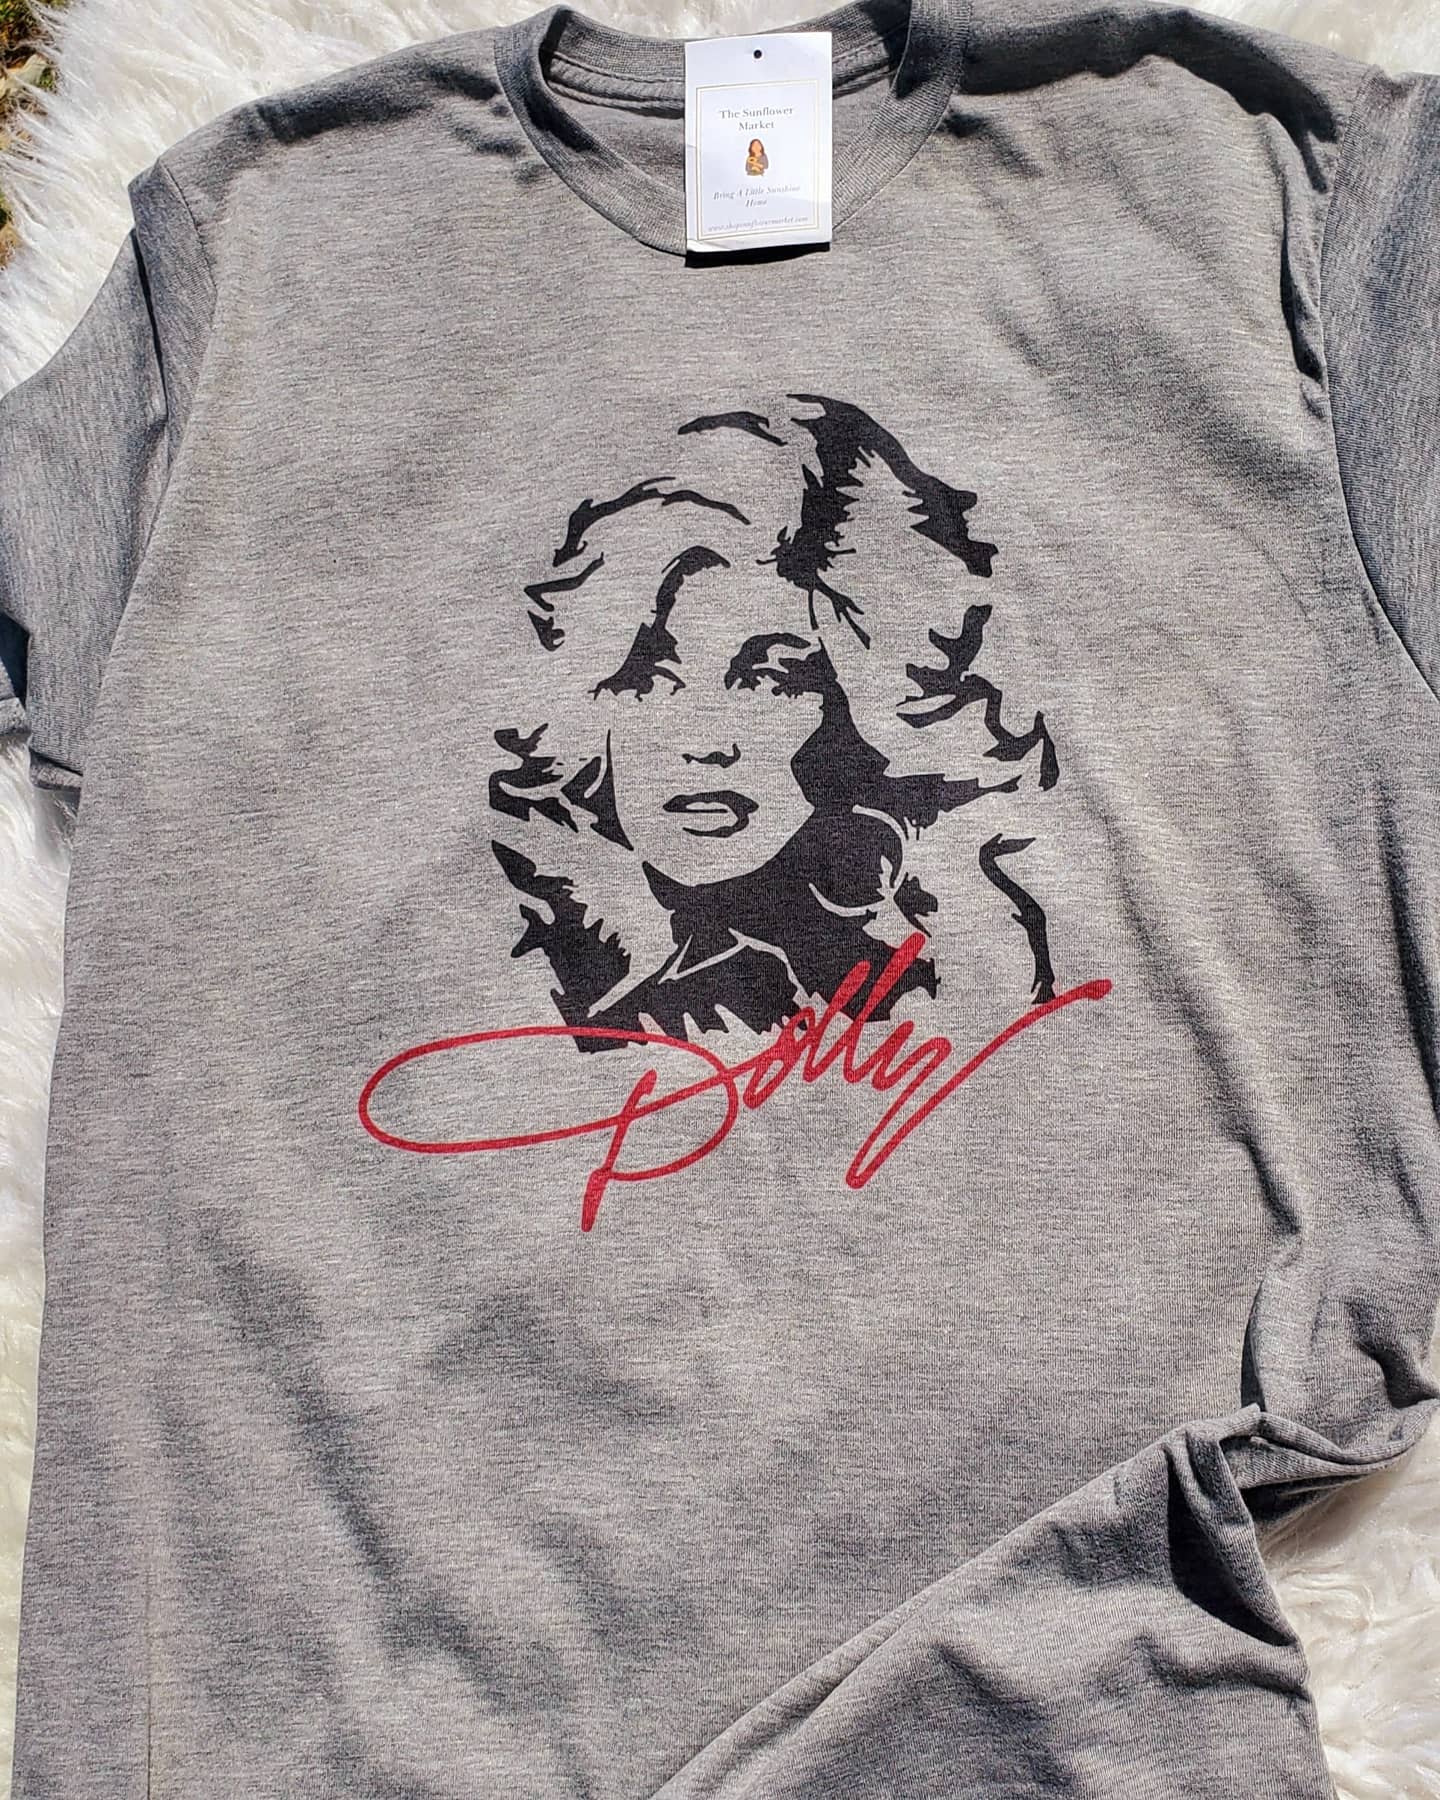 Dolly Parton Red Signature Tee